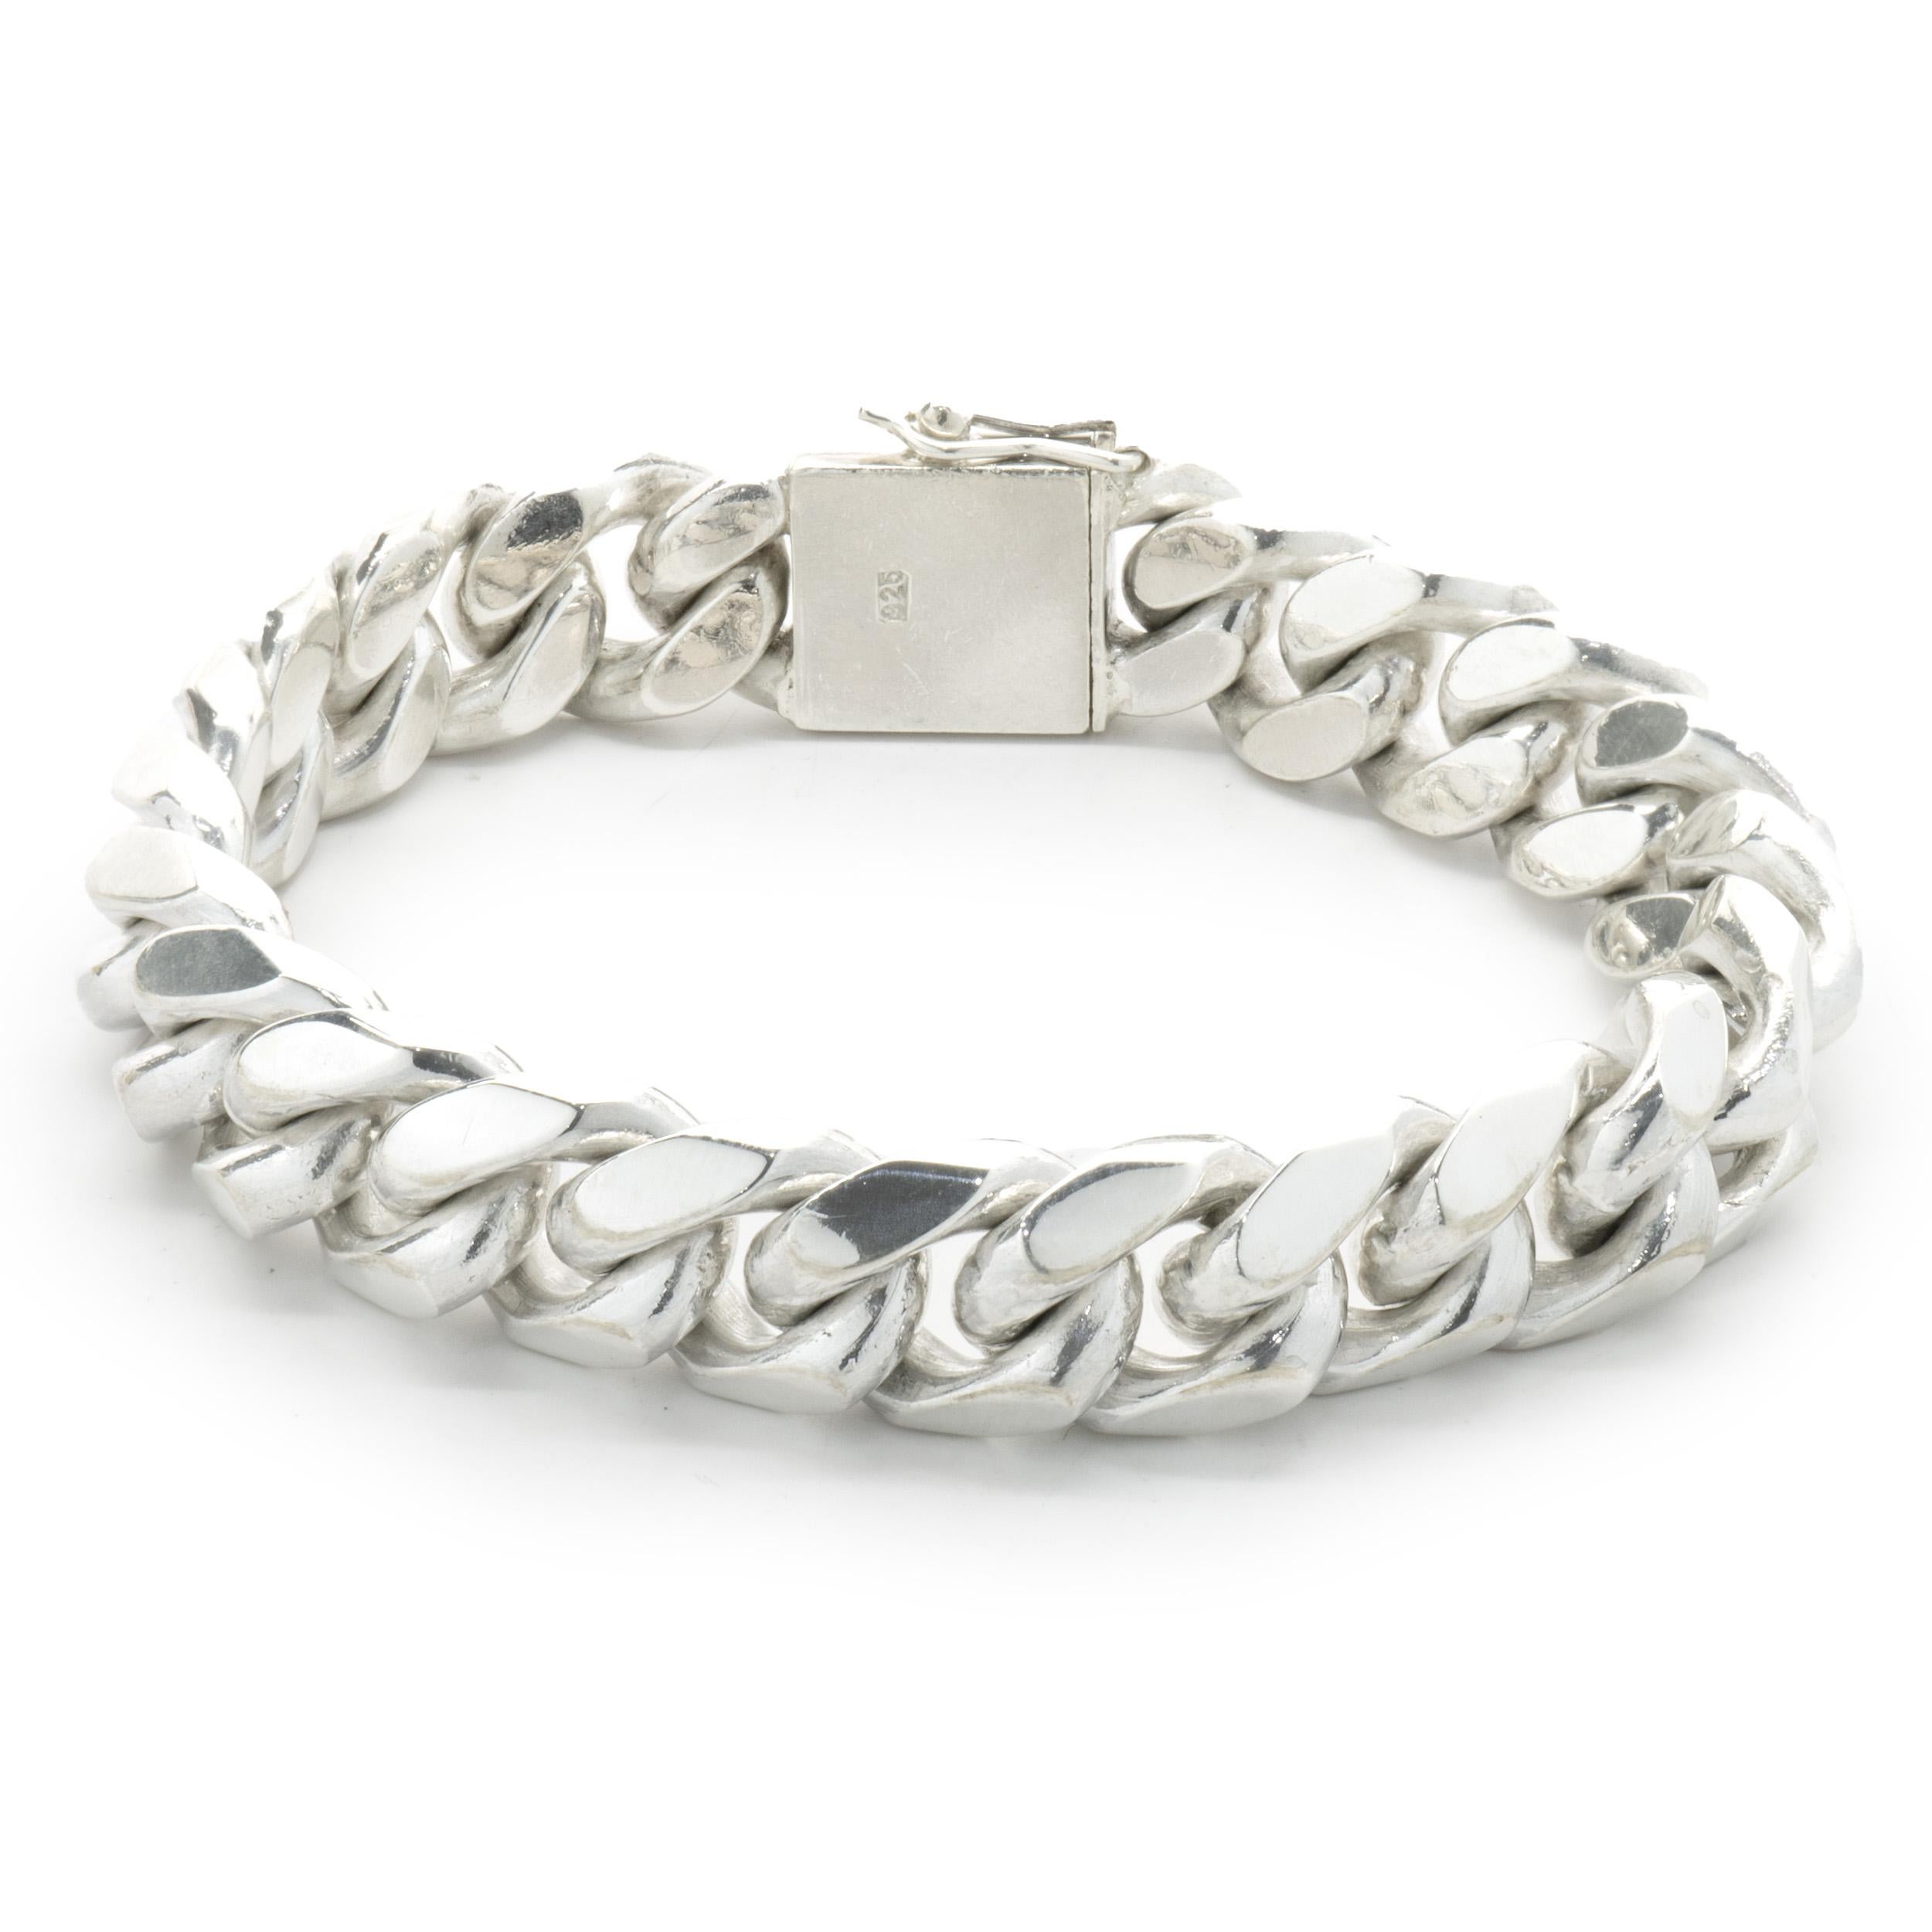 Designer: custom
Material: sterling silver
Dimensions: bracelet will fit up to a 7-inch wrist
Weight: 83.26 grams